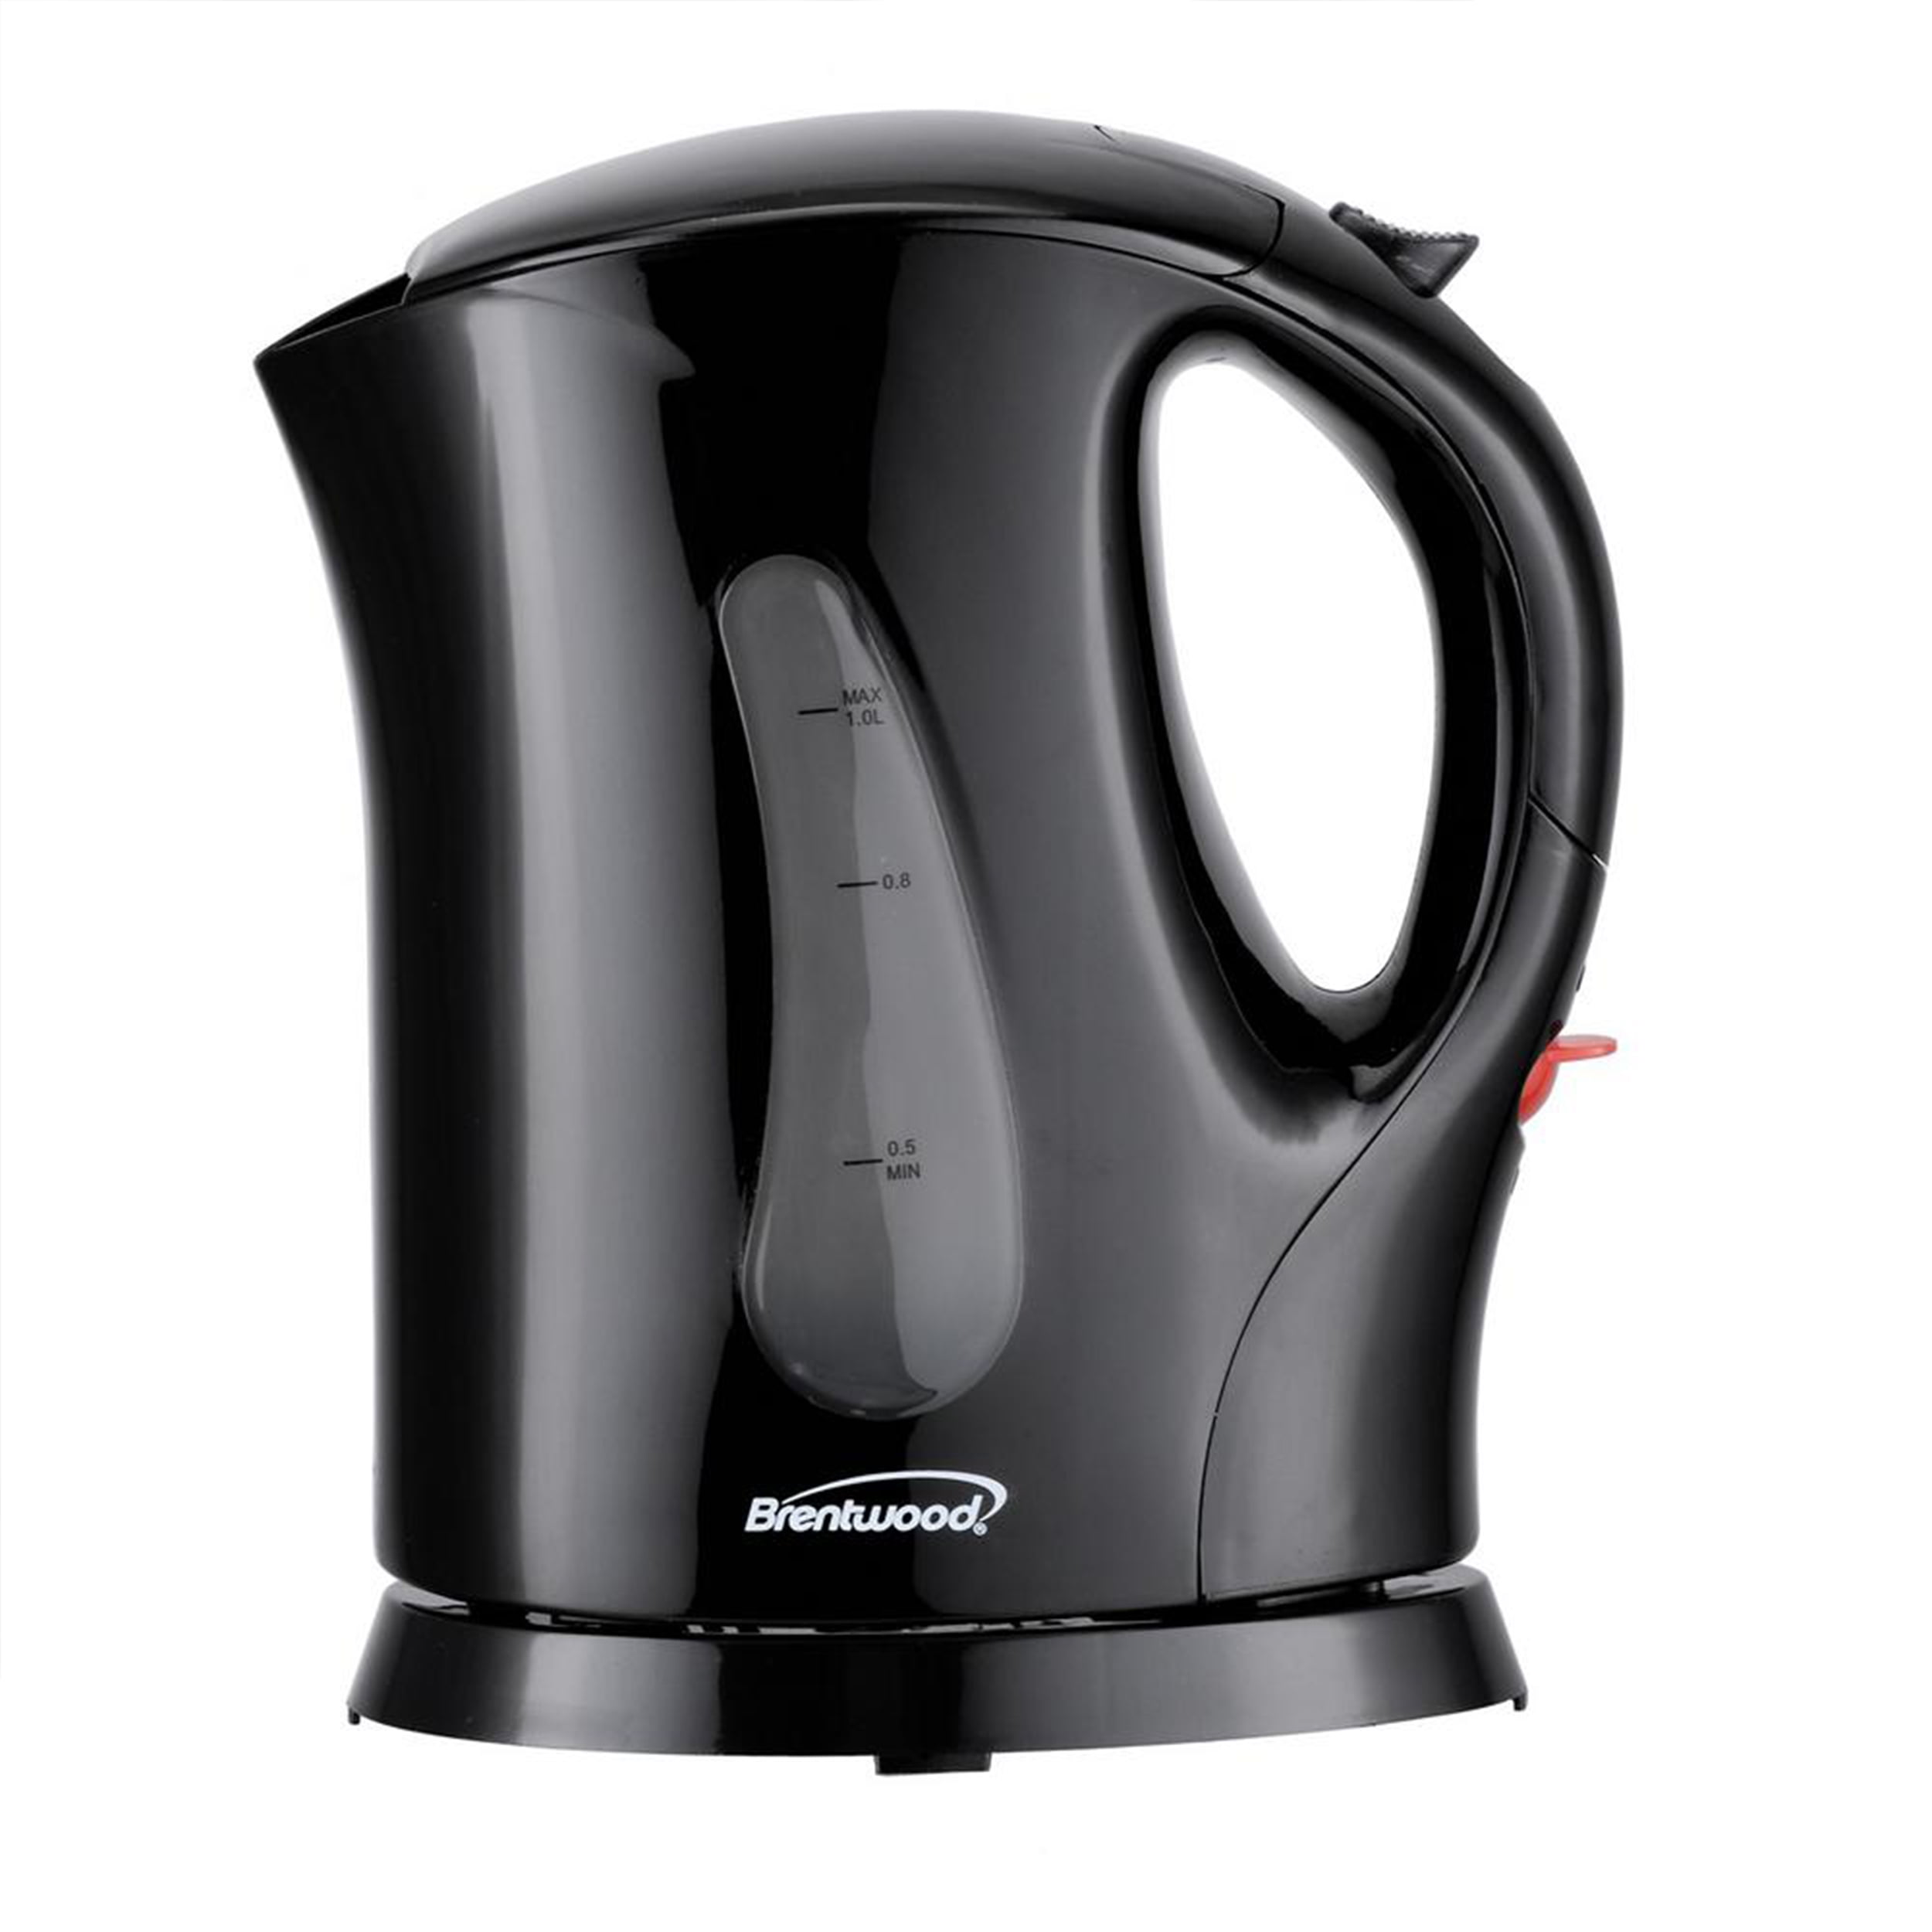 Brentwood Appliances BPA-Free 1-liter Cordless Electric Kettle